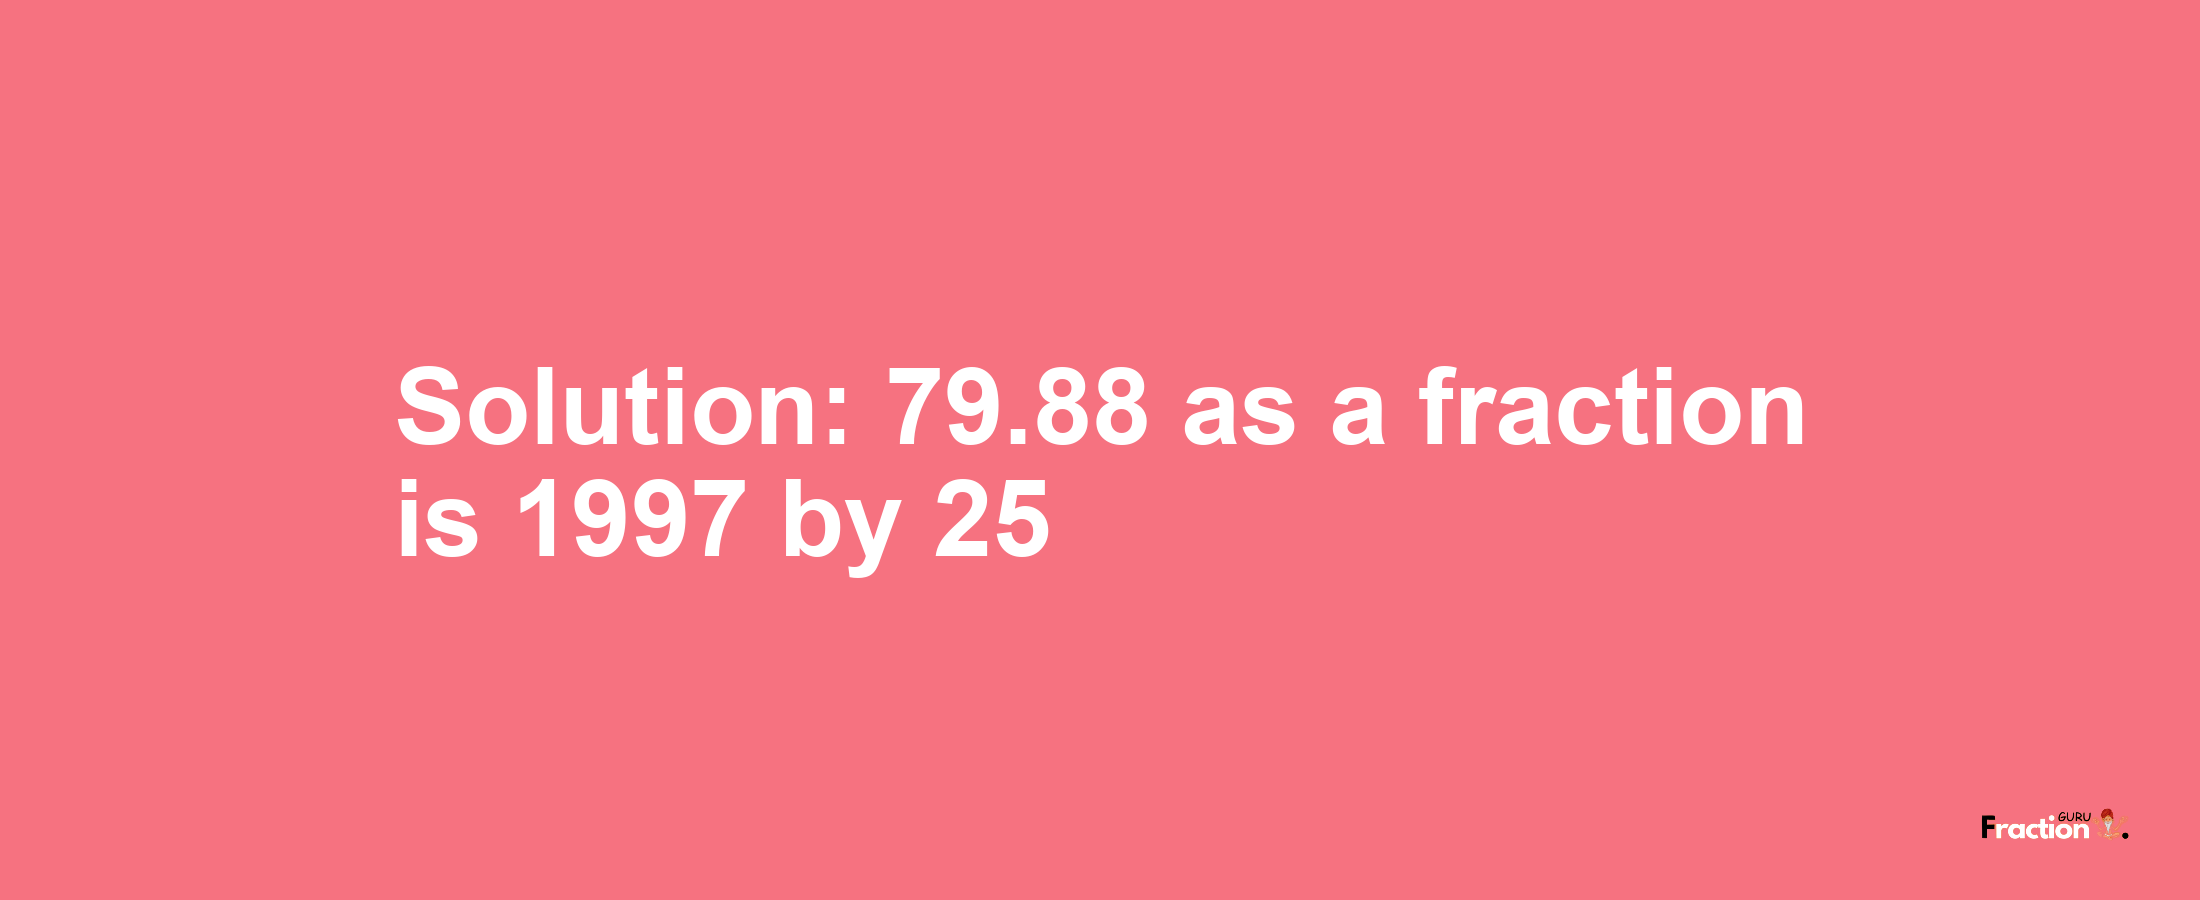 Solution:79.88 as a fraction is 1997/25